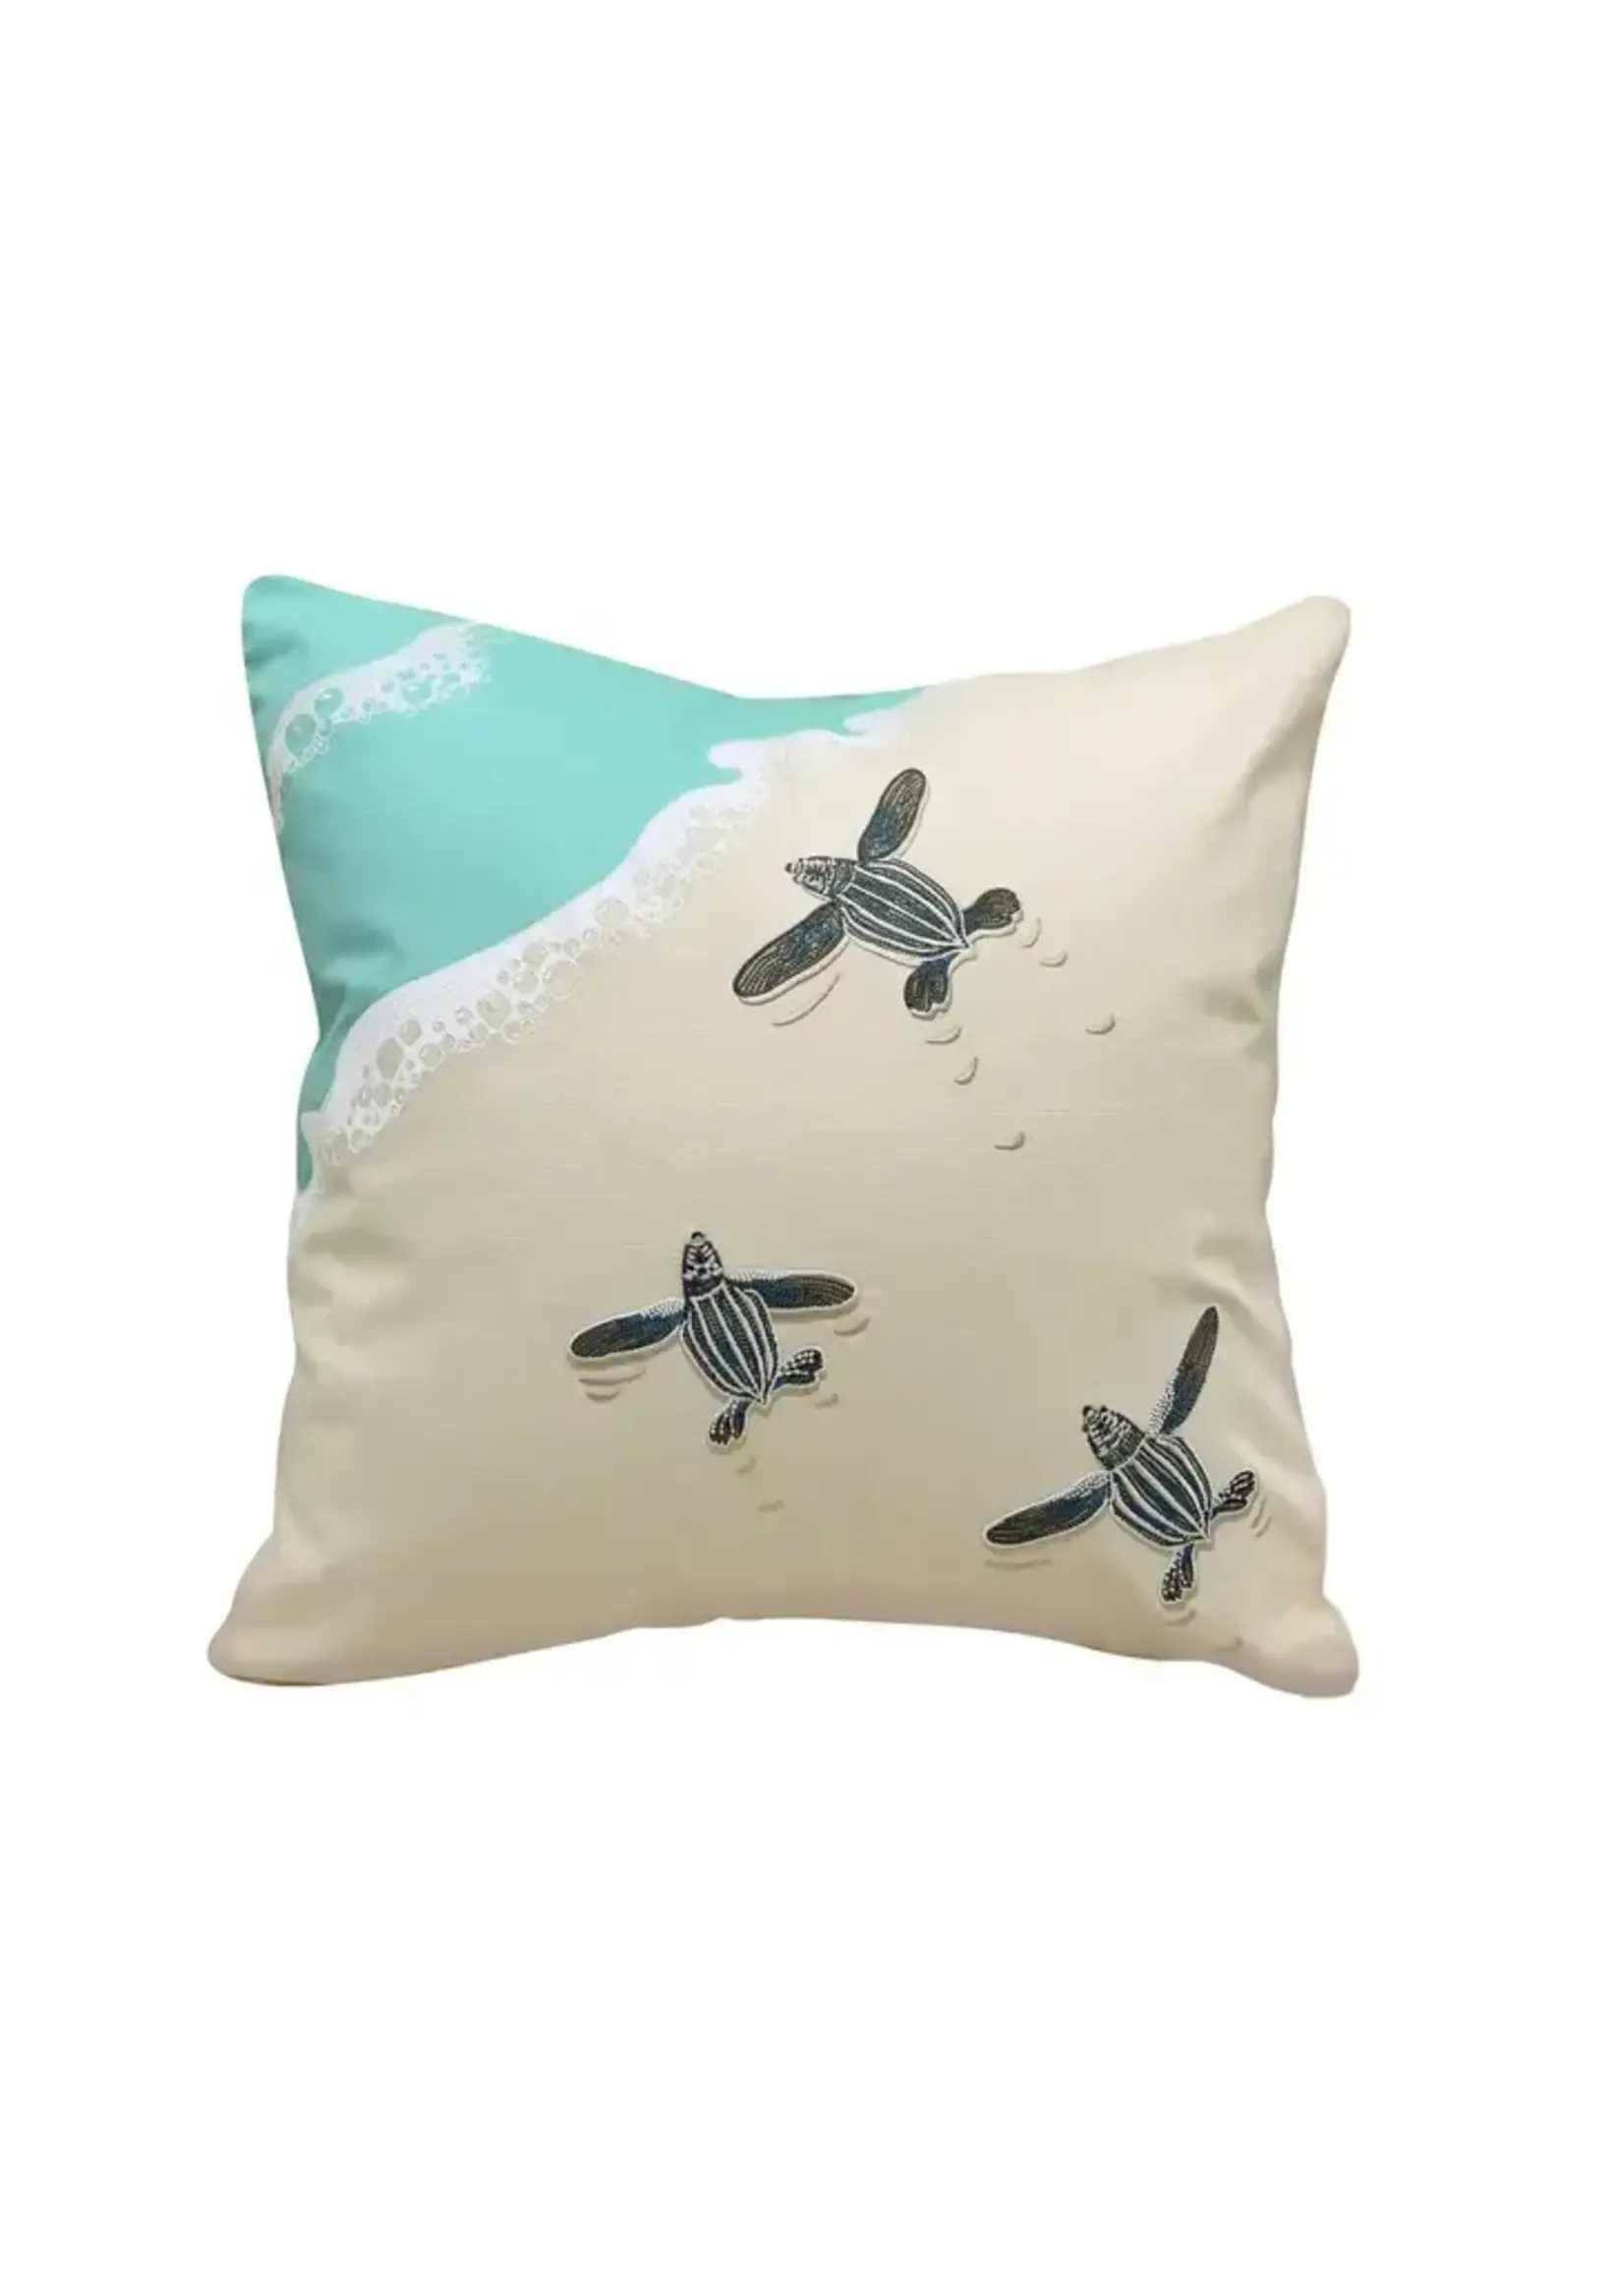 Rightside Designs Leatherbacks Scurry Embroidered Pillow